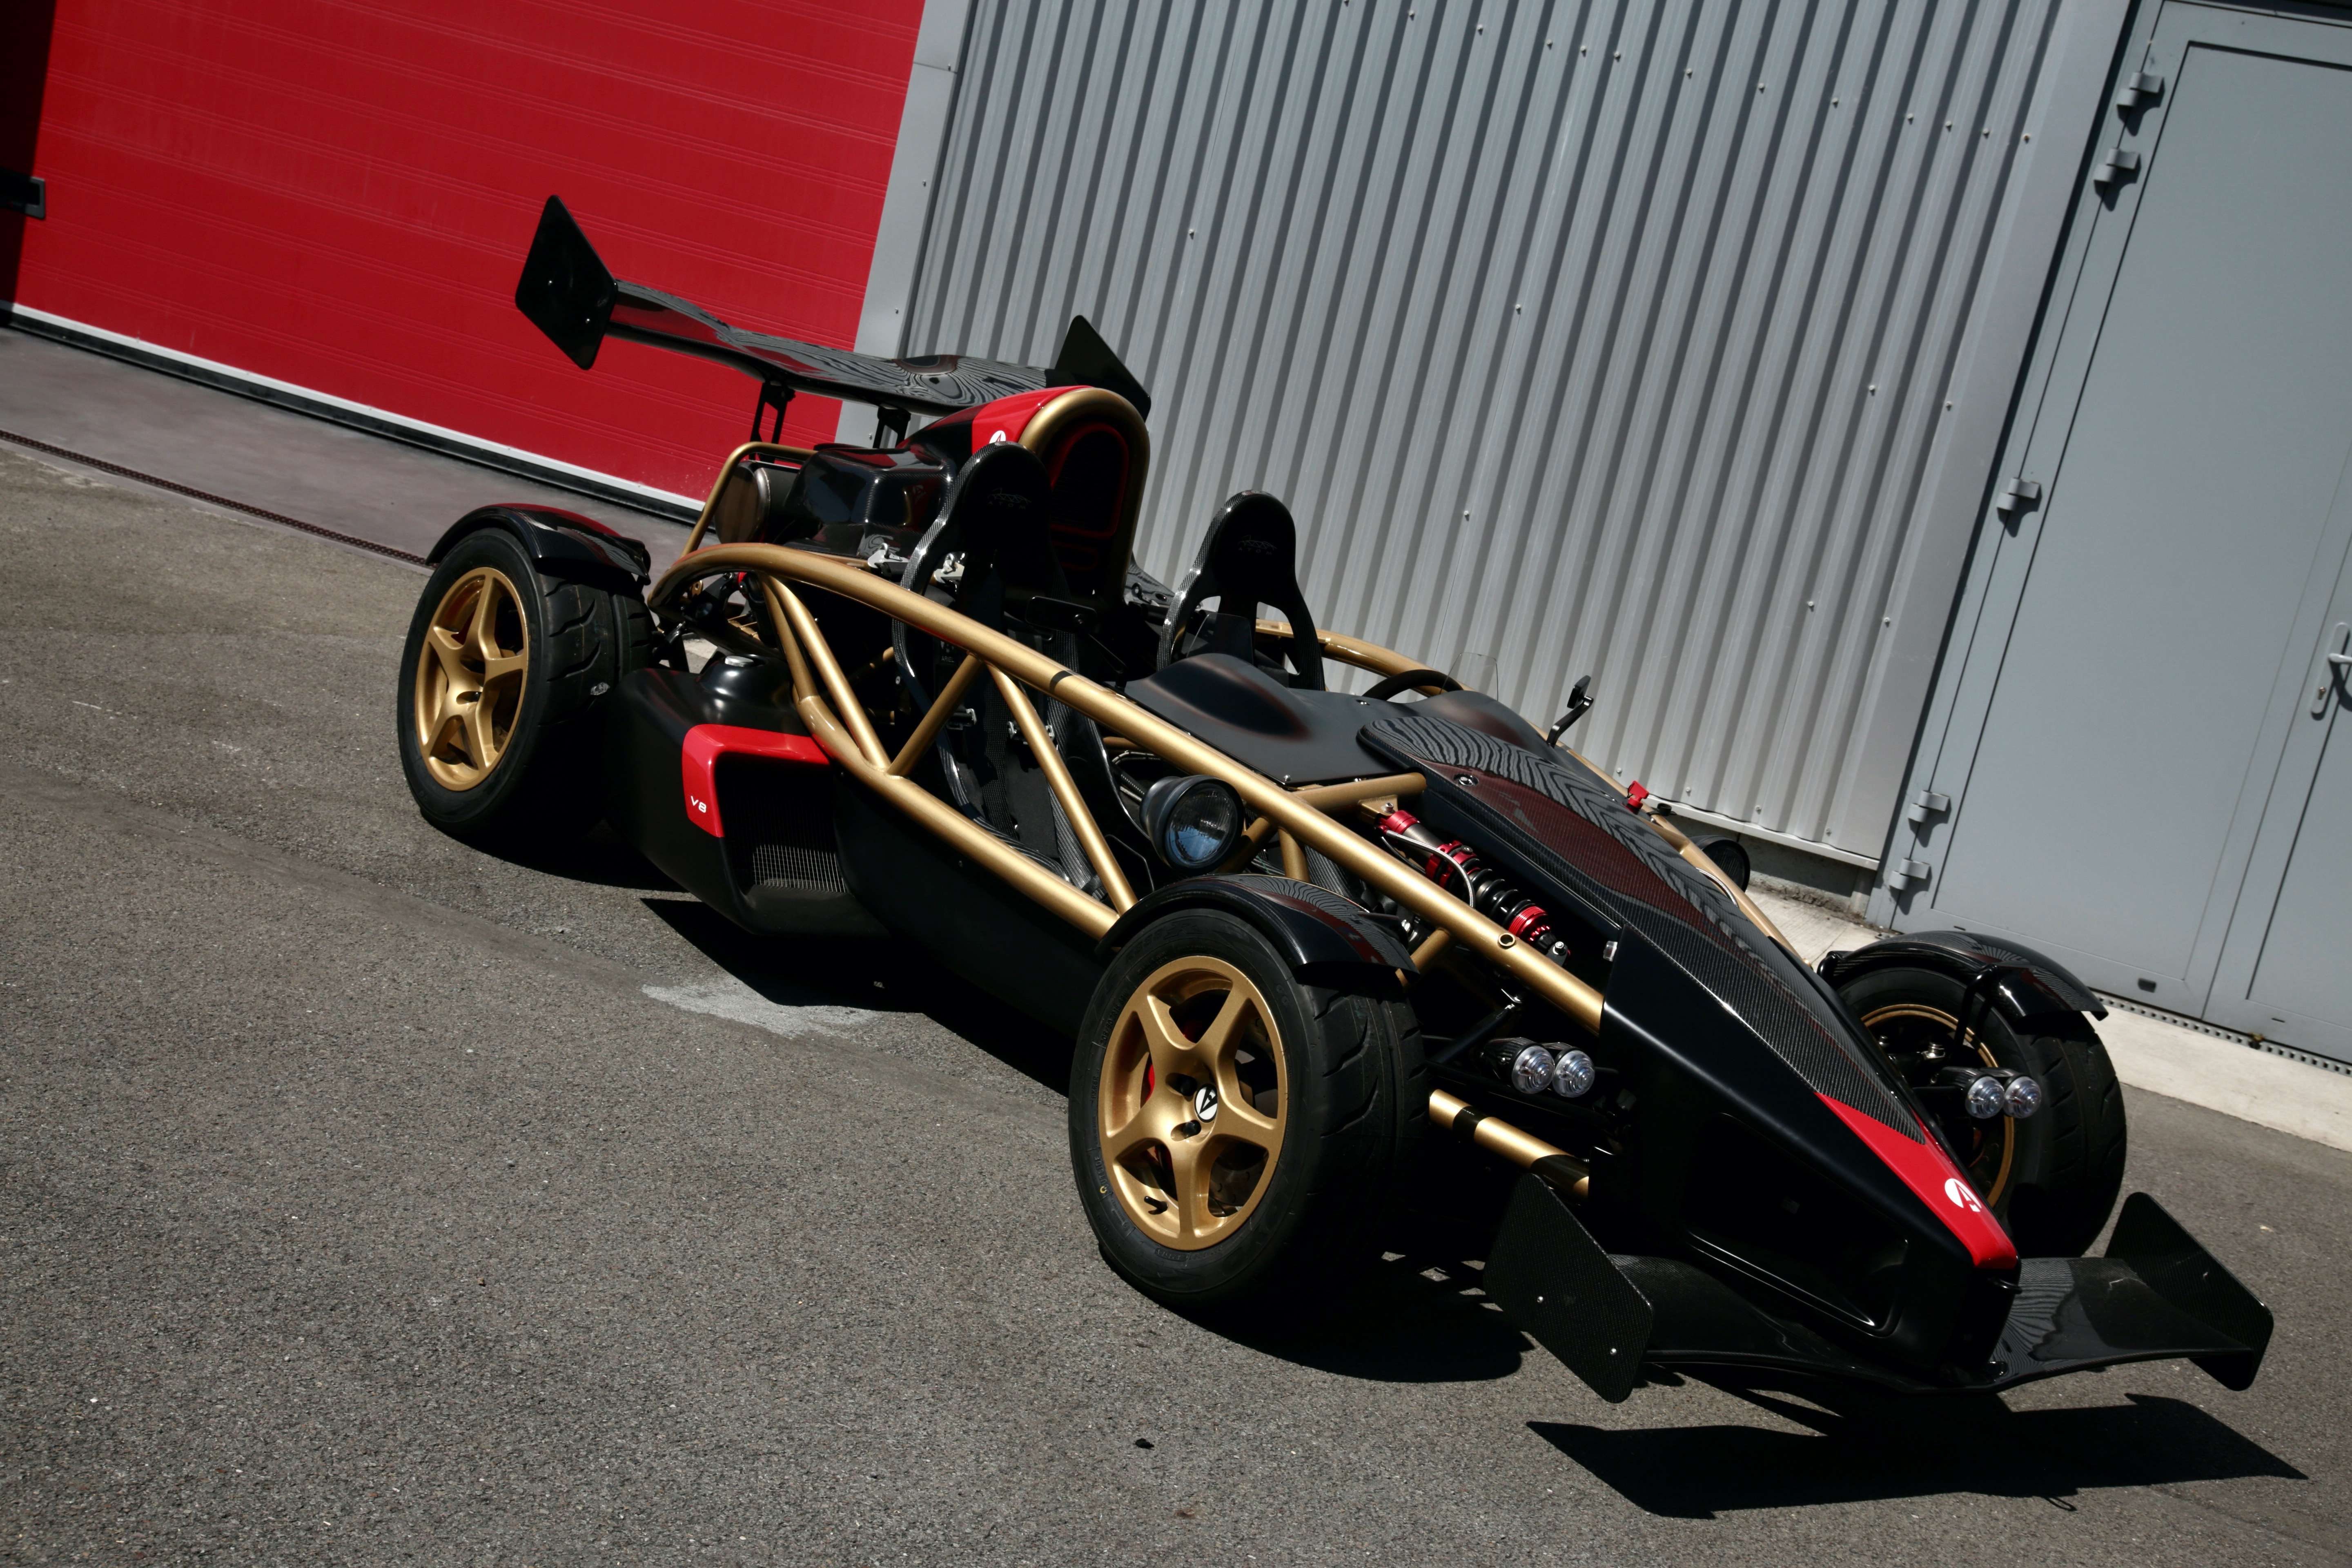 Ariel Motor Atom Other in Black used in Alleur for € 220,000.-